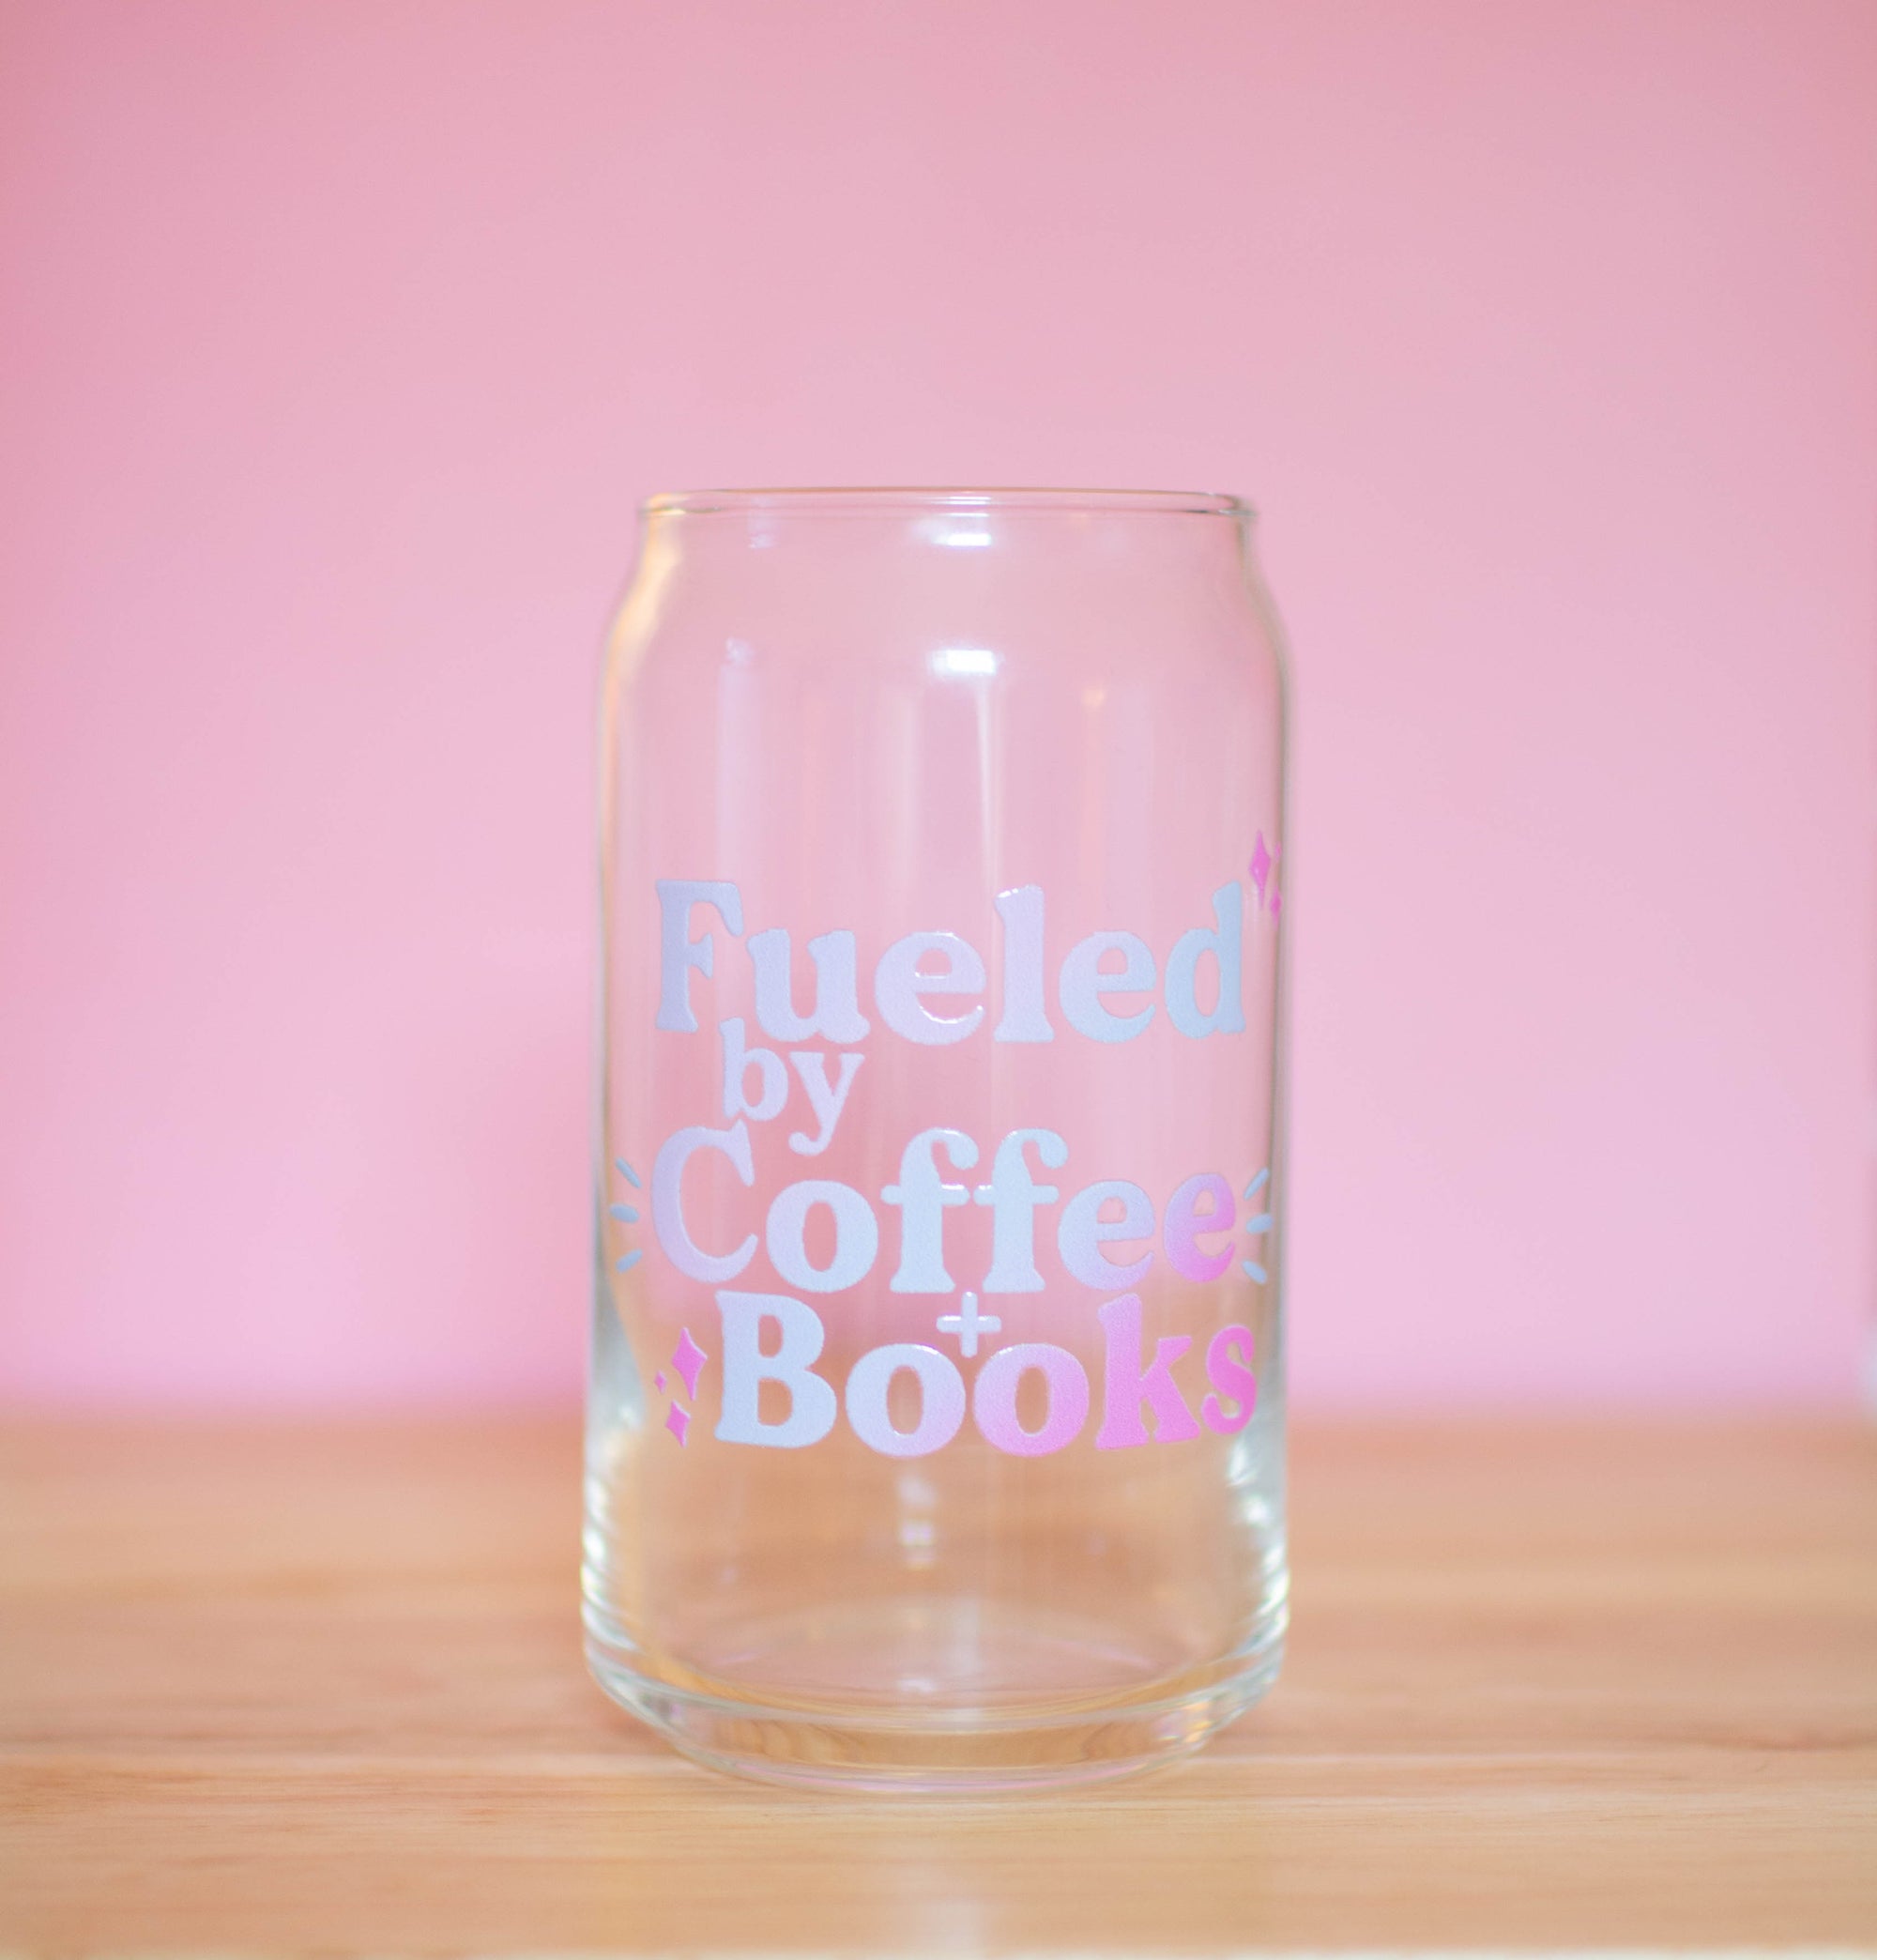 Fueled by Coffee+Books 16oz Cup